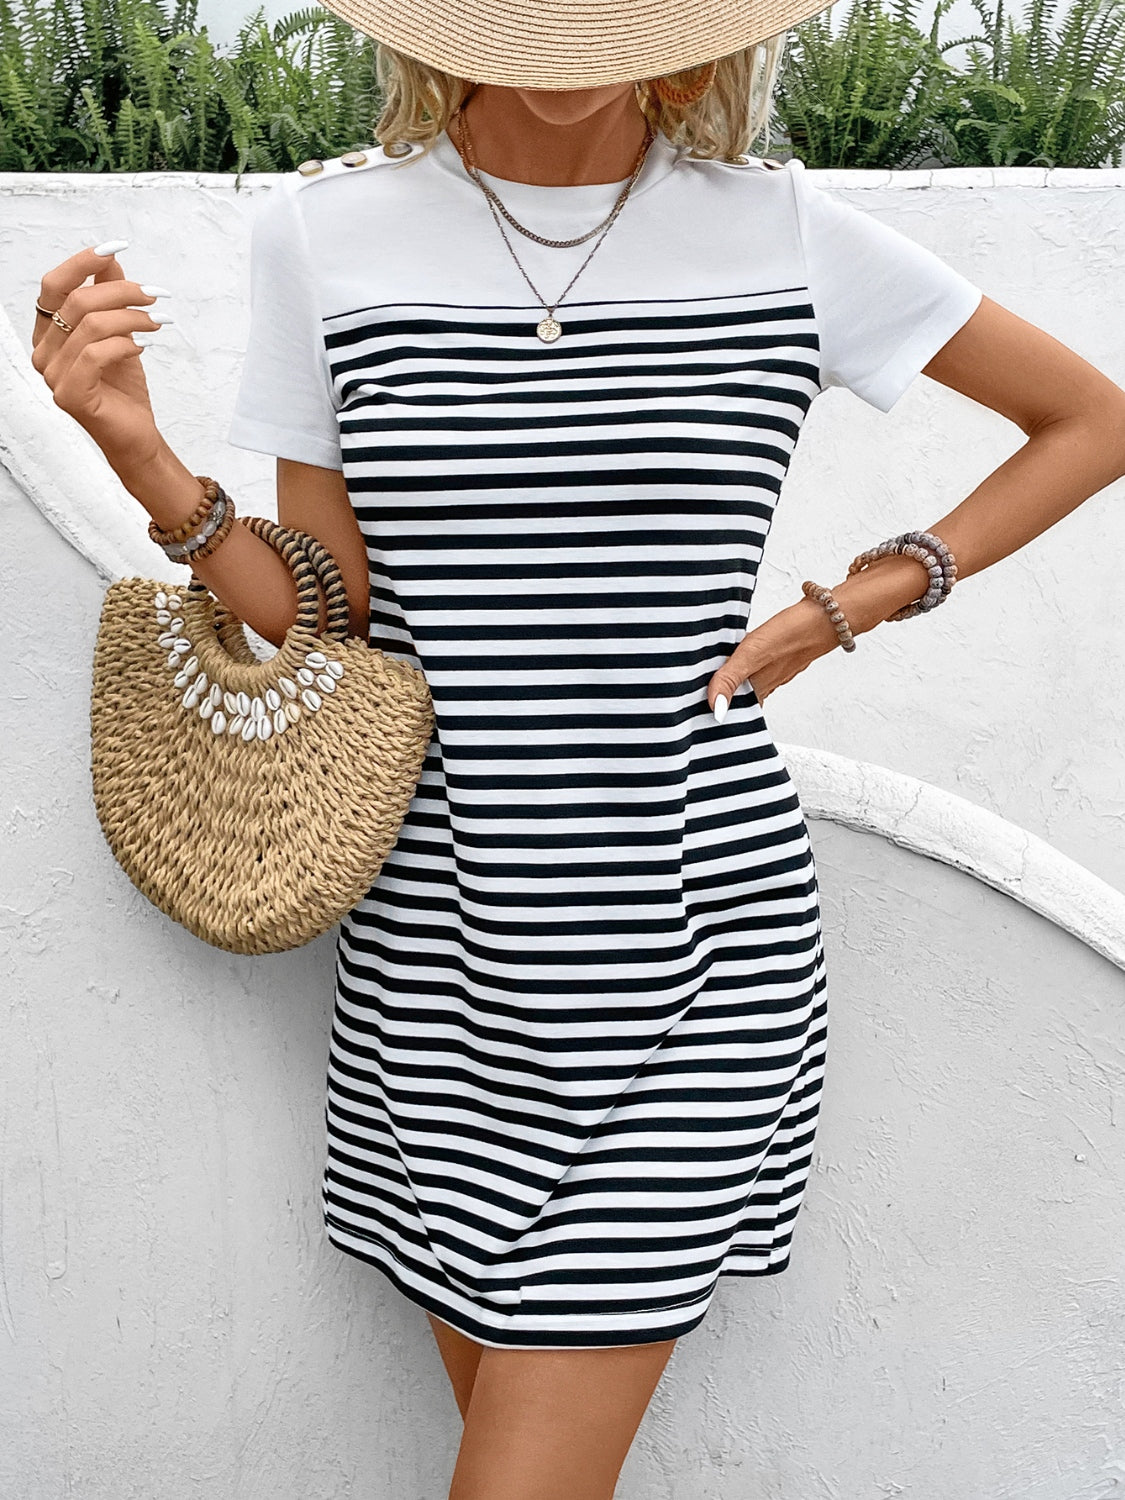 Shop the chic navy & white striped tee dress - a perfect mix of style & comfort. Take your wardrobe to the next level with this easy-to-style piece!